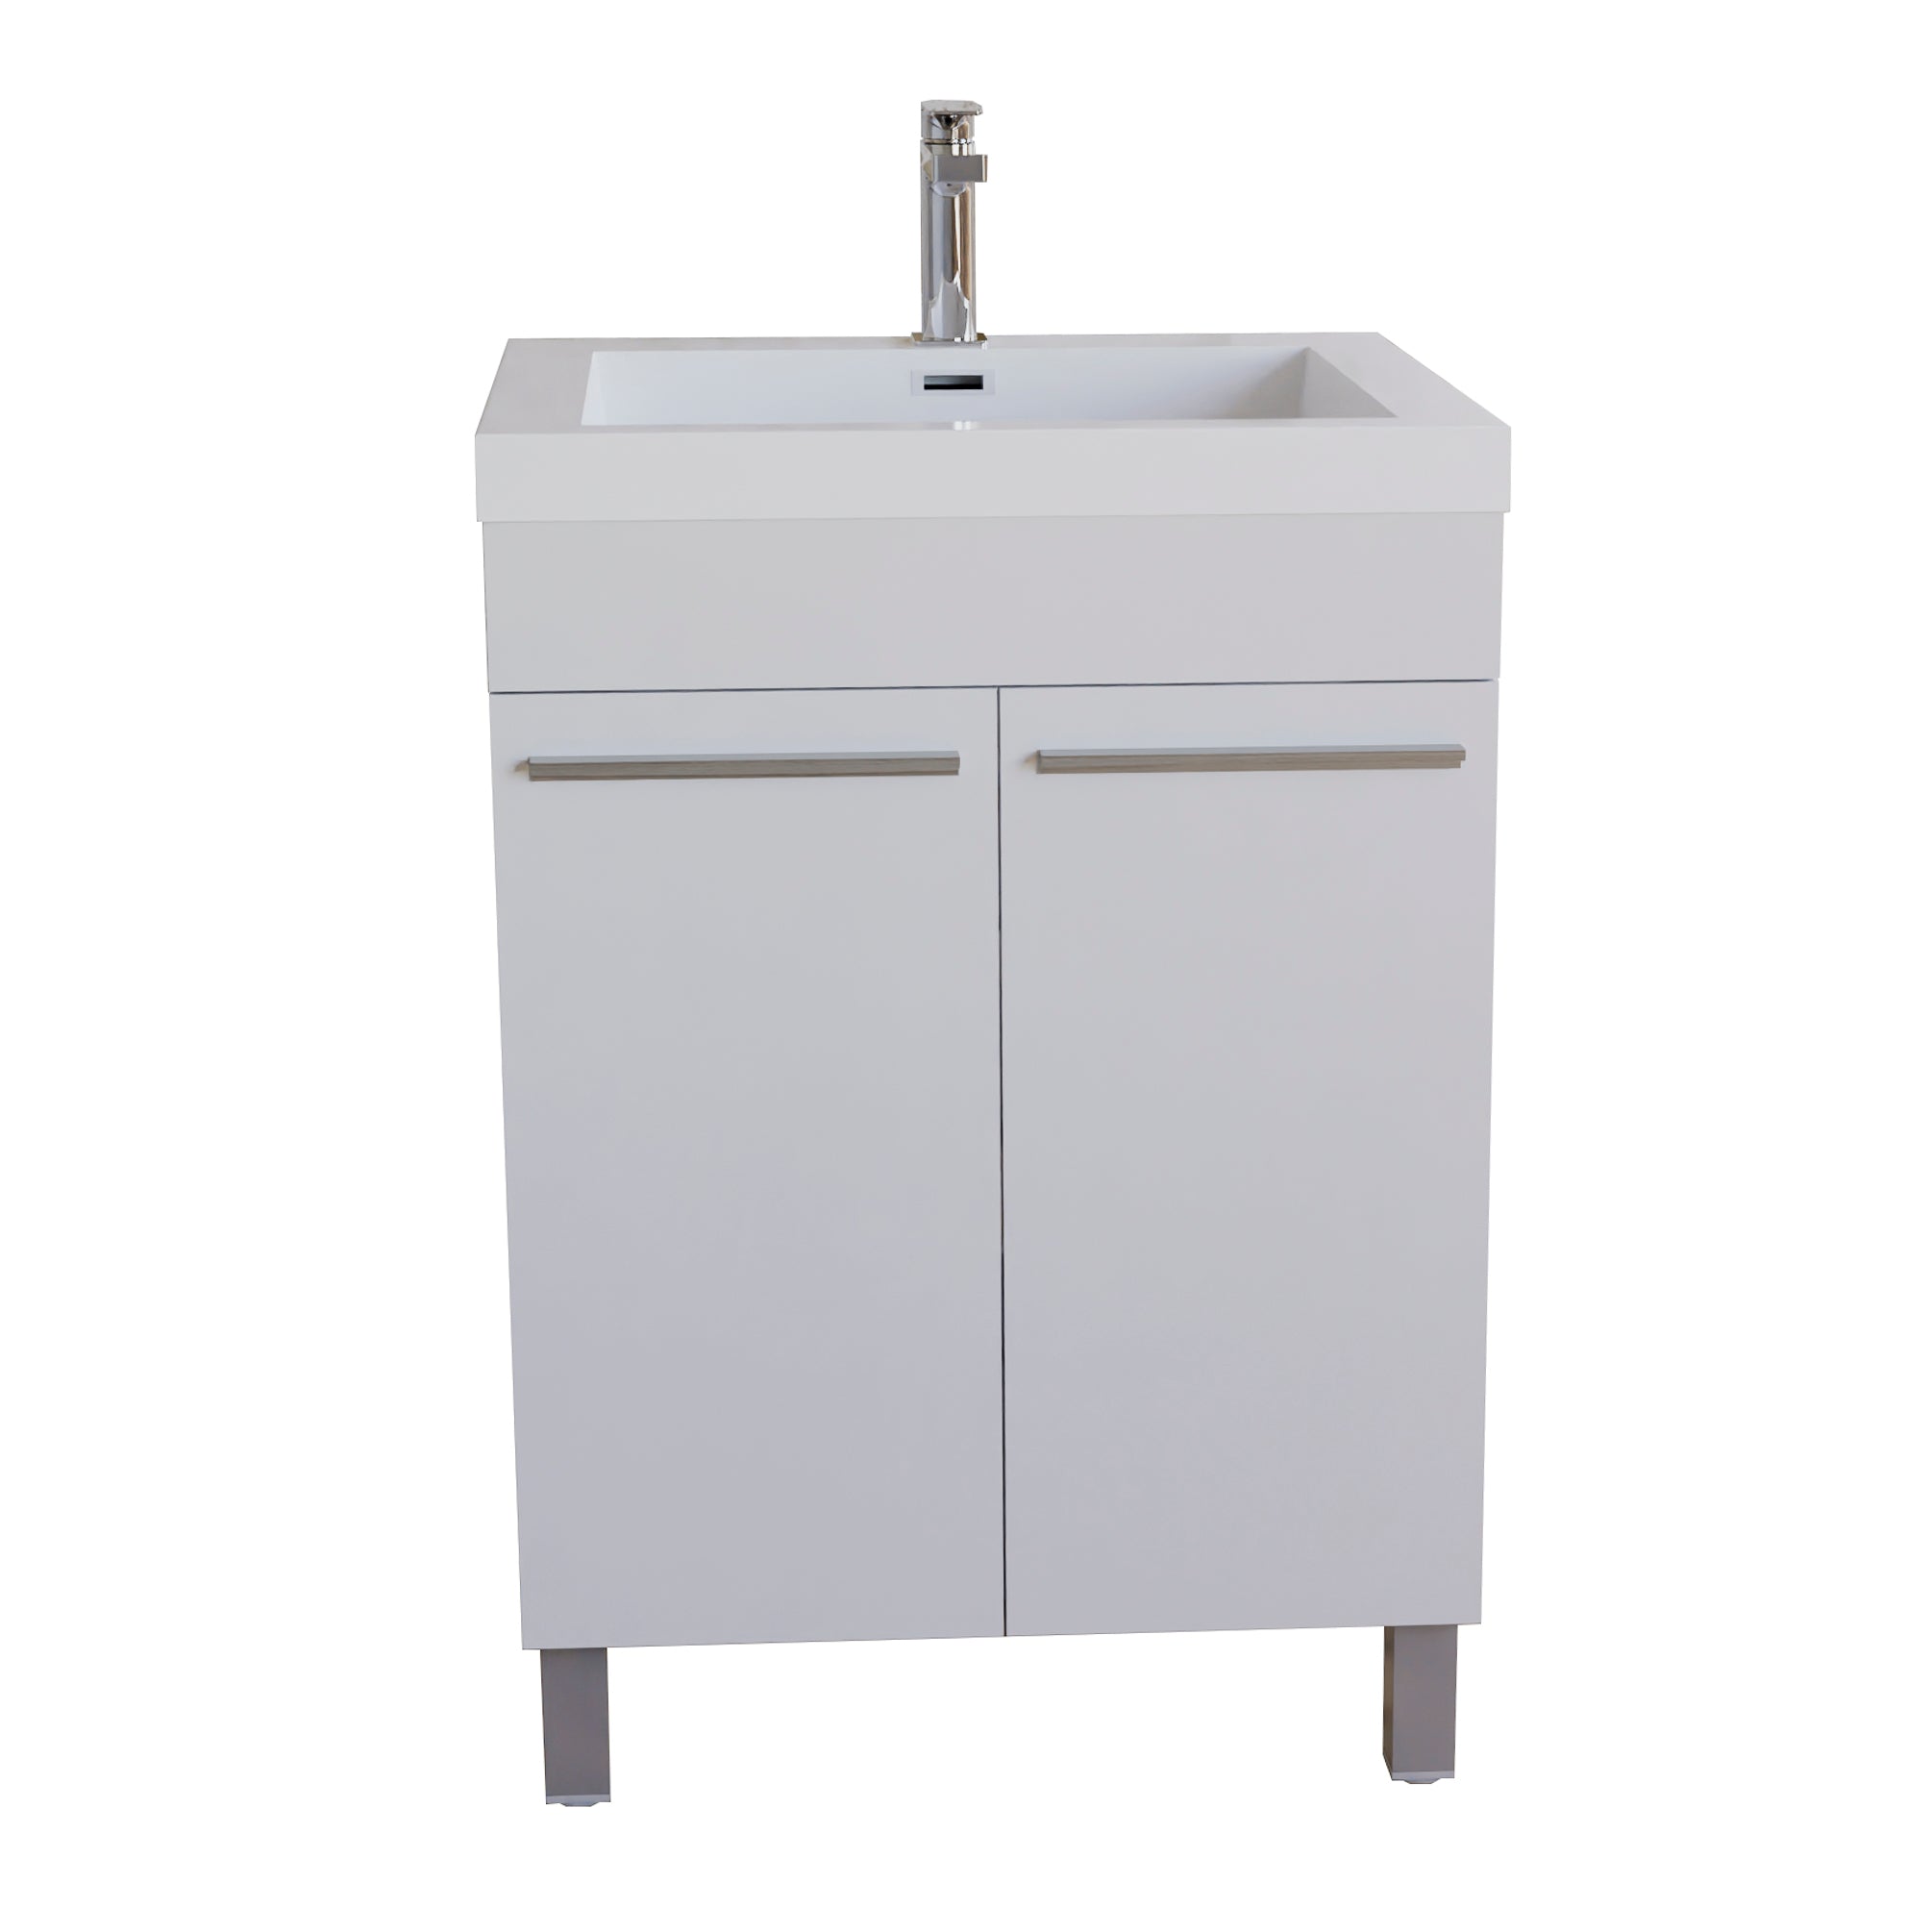 Ocean 23.5 White High Gloss Cabinet, Square Cultured Marble Sink, Free Standing Vanity Set